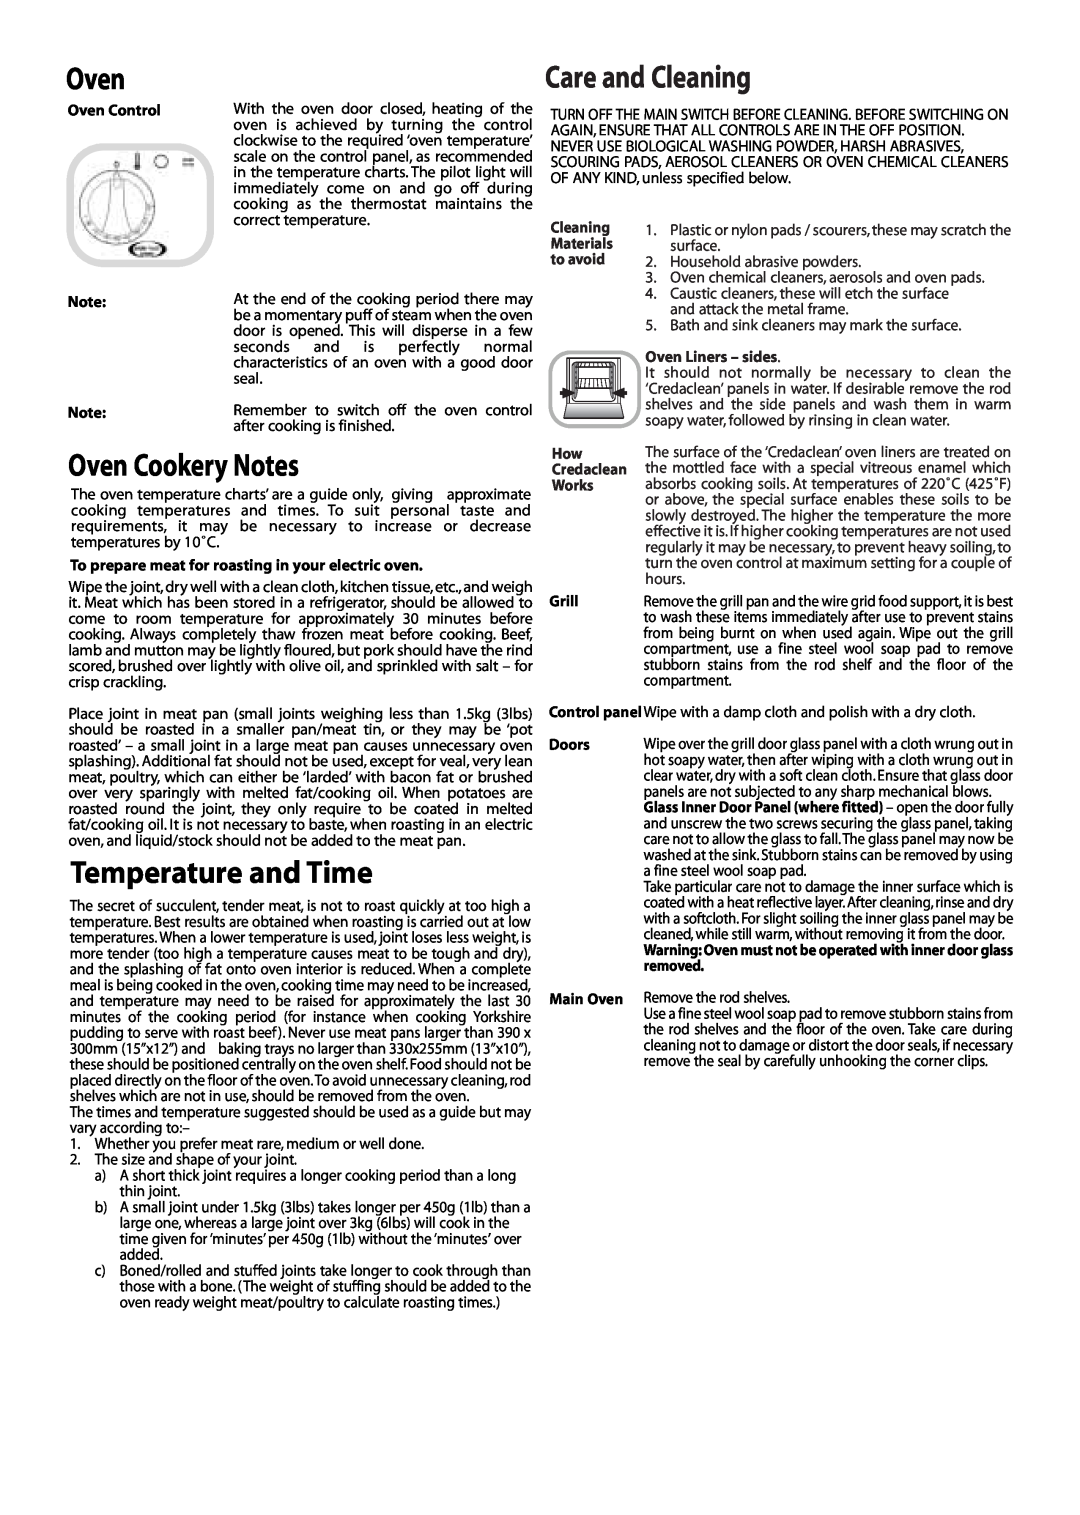 Creda J151E installation instructions Care and Cleaning, Oven Cookery Notes, Temperature and Time 